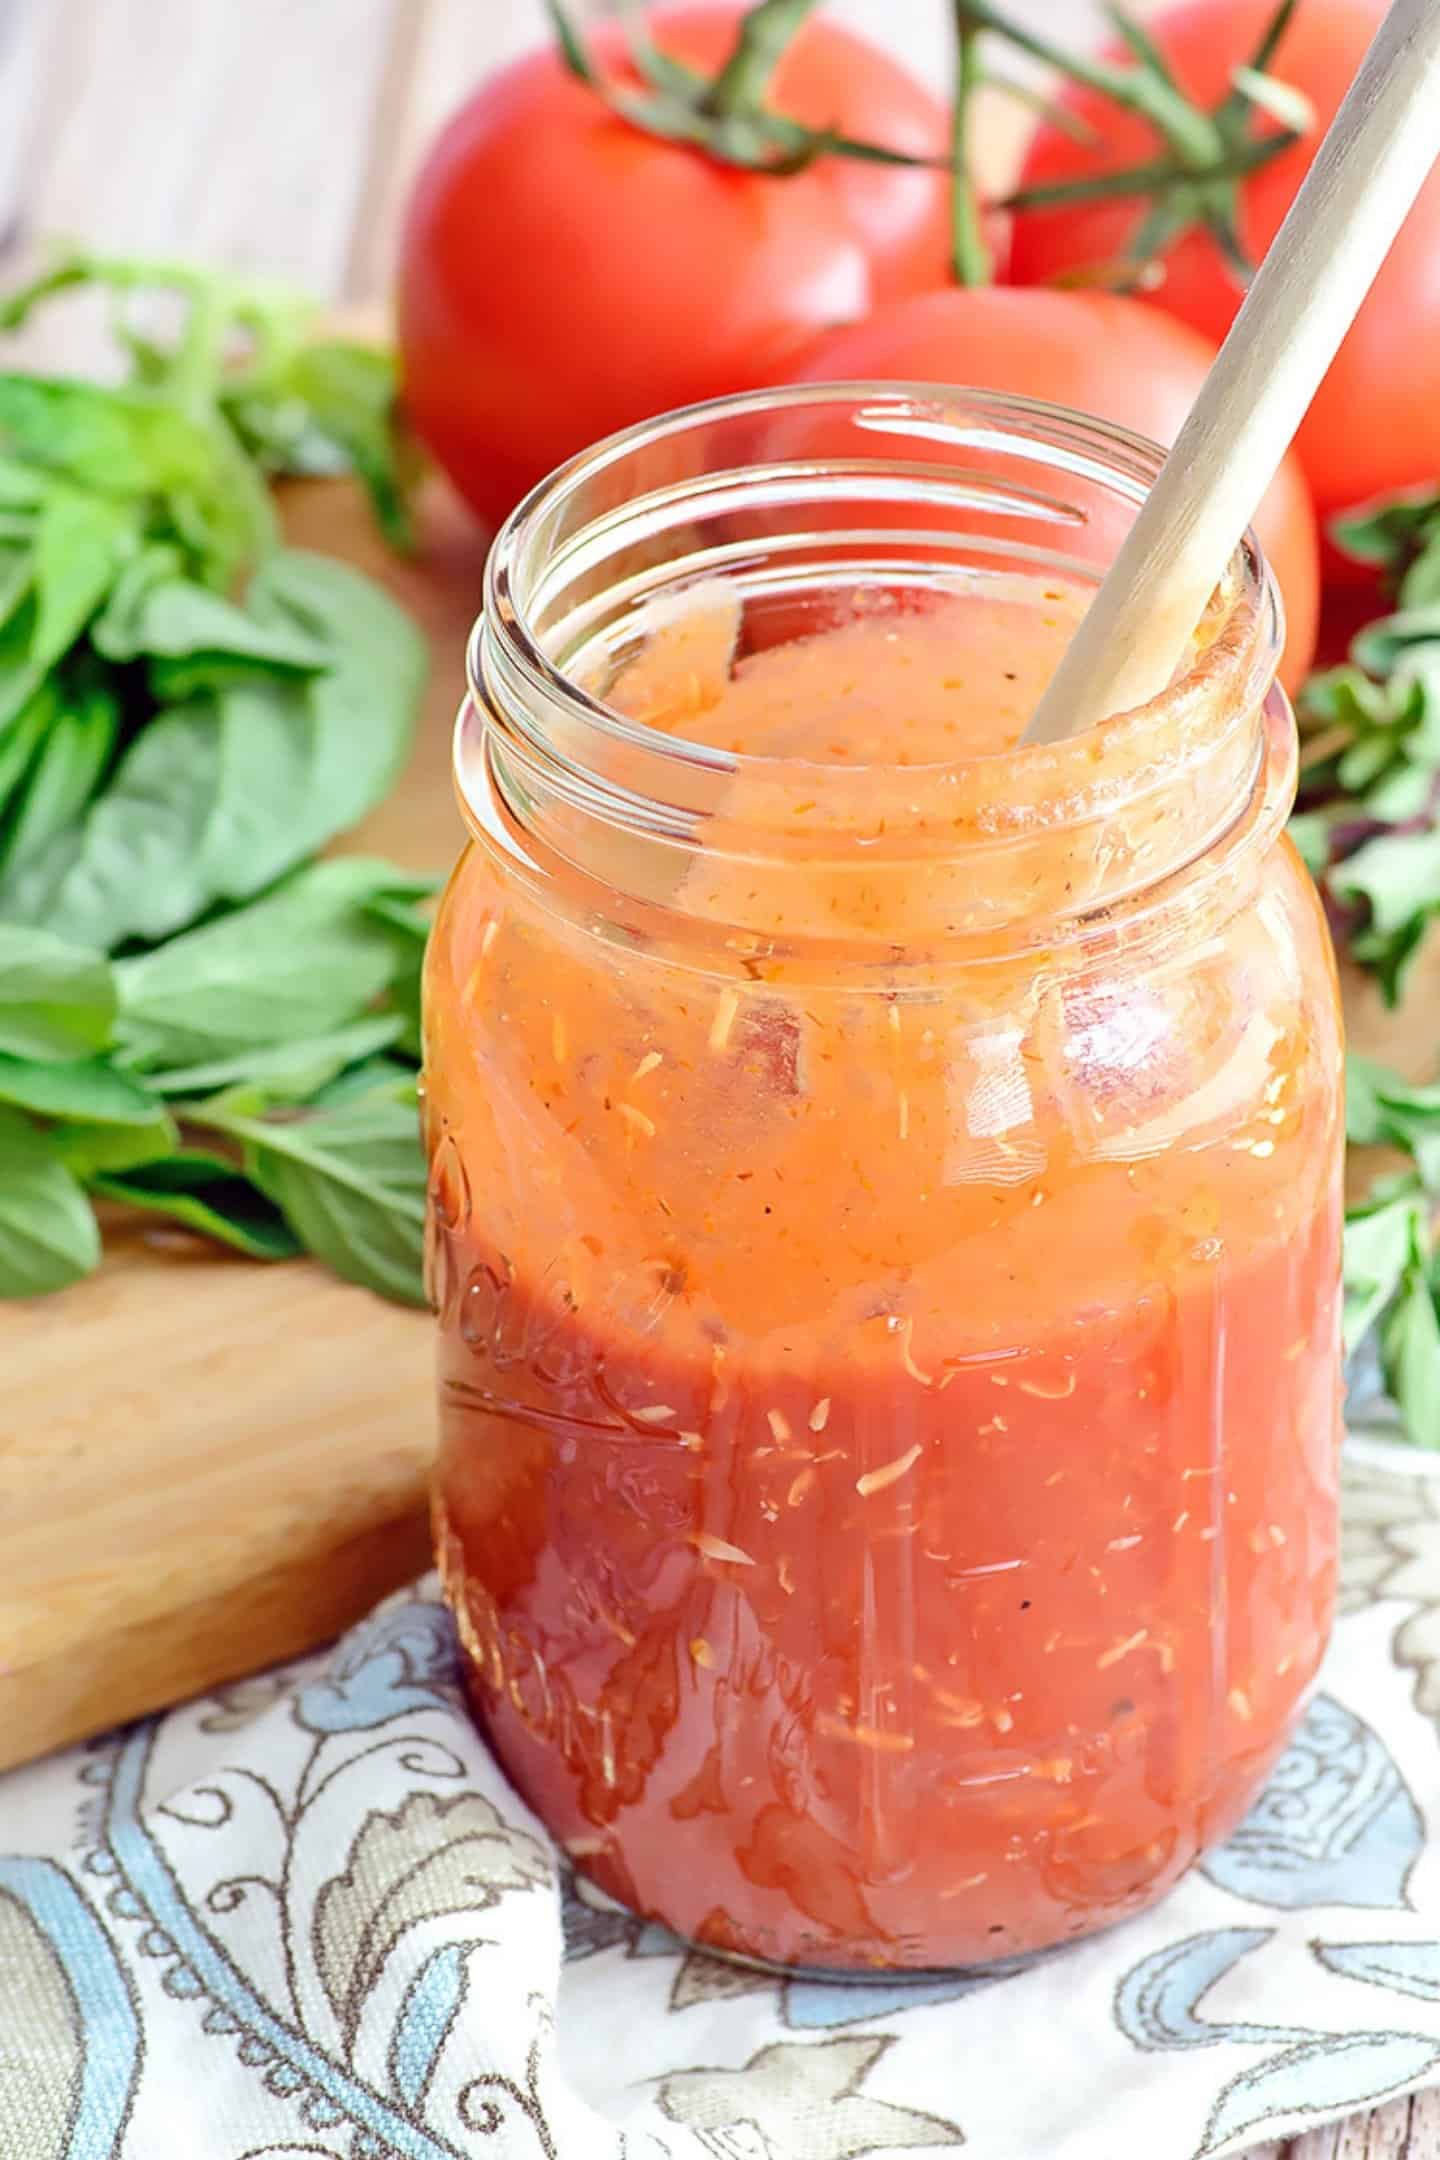 Pizza sauce in a jar with fresh tomatoes